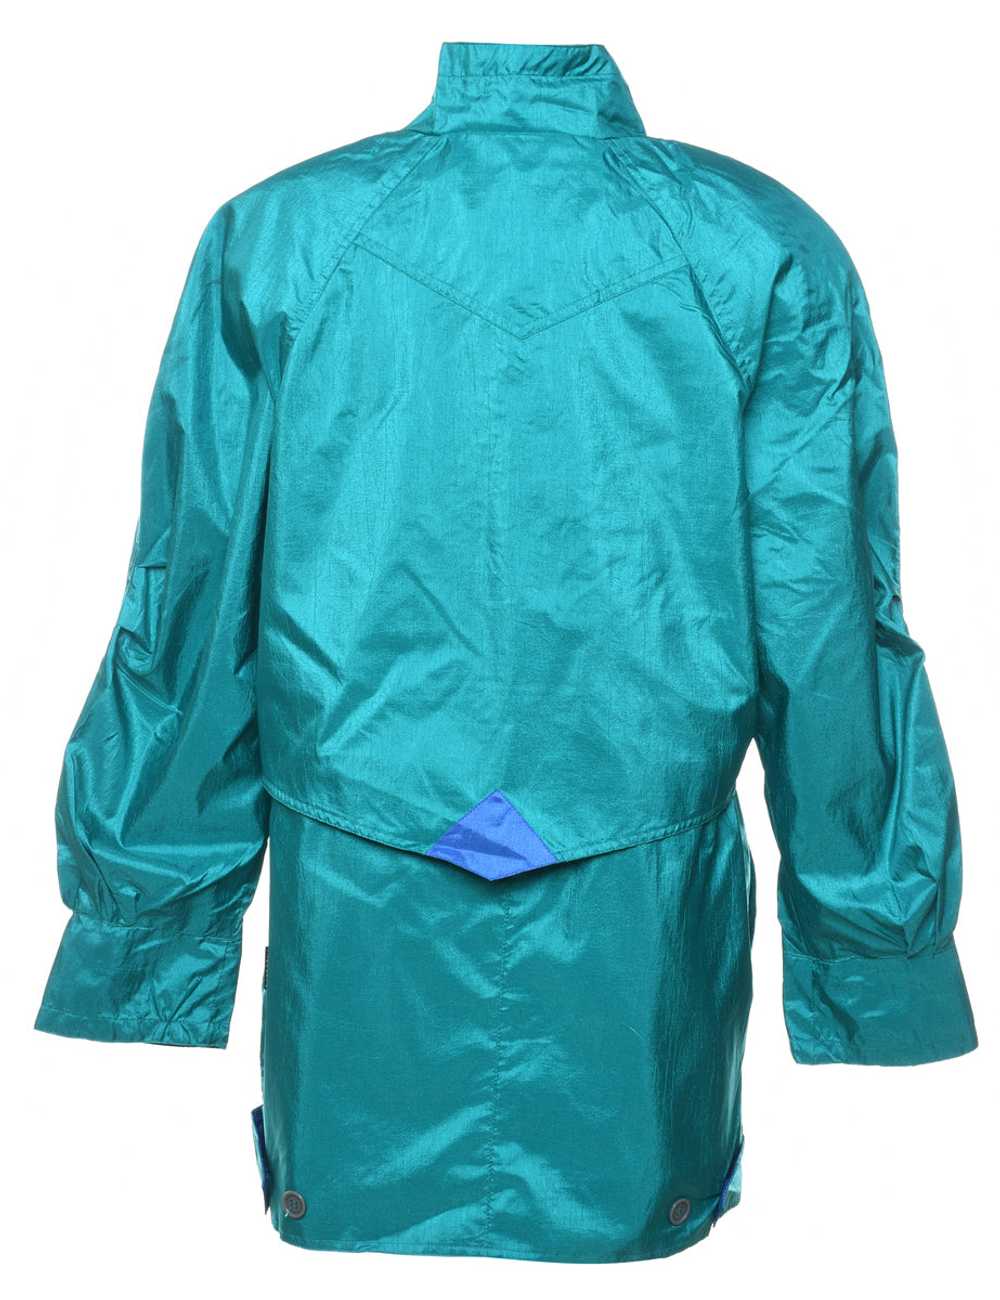 Turquoise & Purple Contrasting Two-Tone Jacket - S - image 2